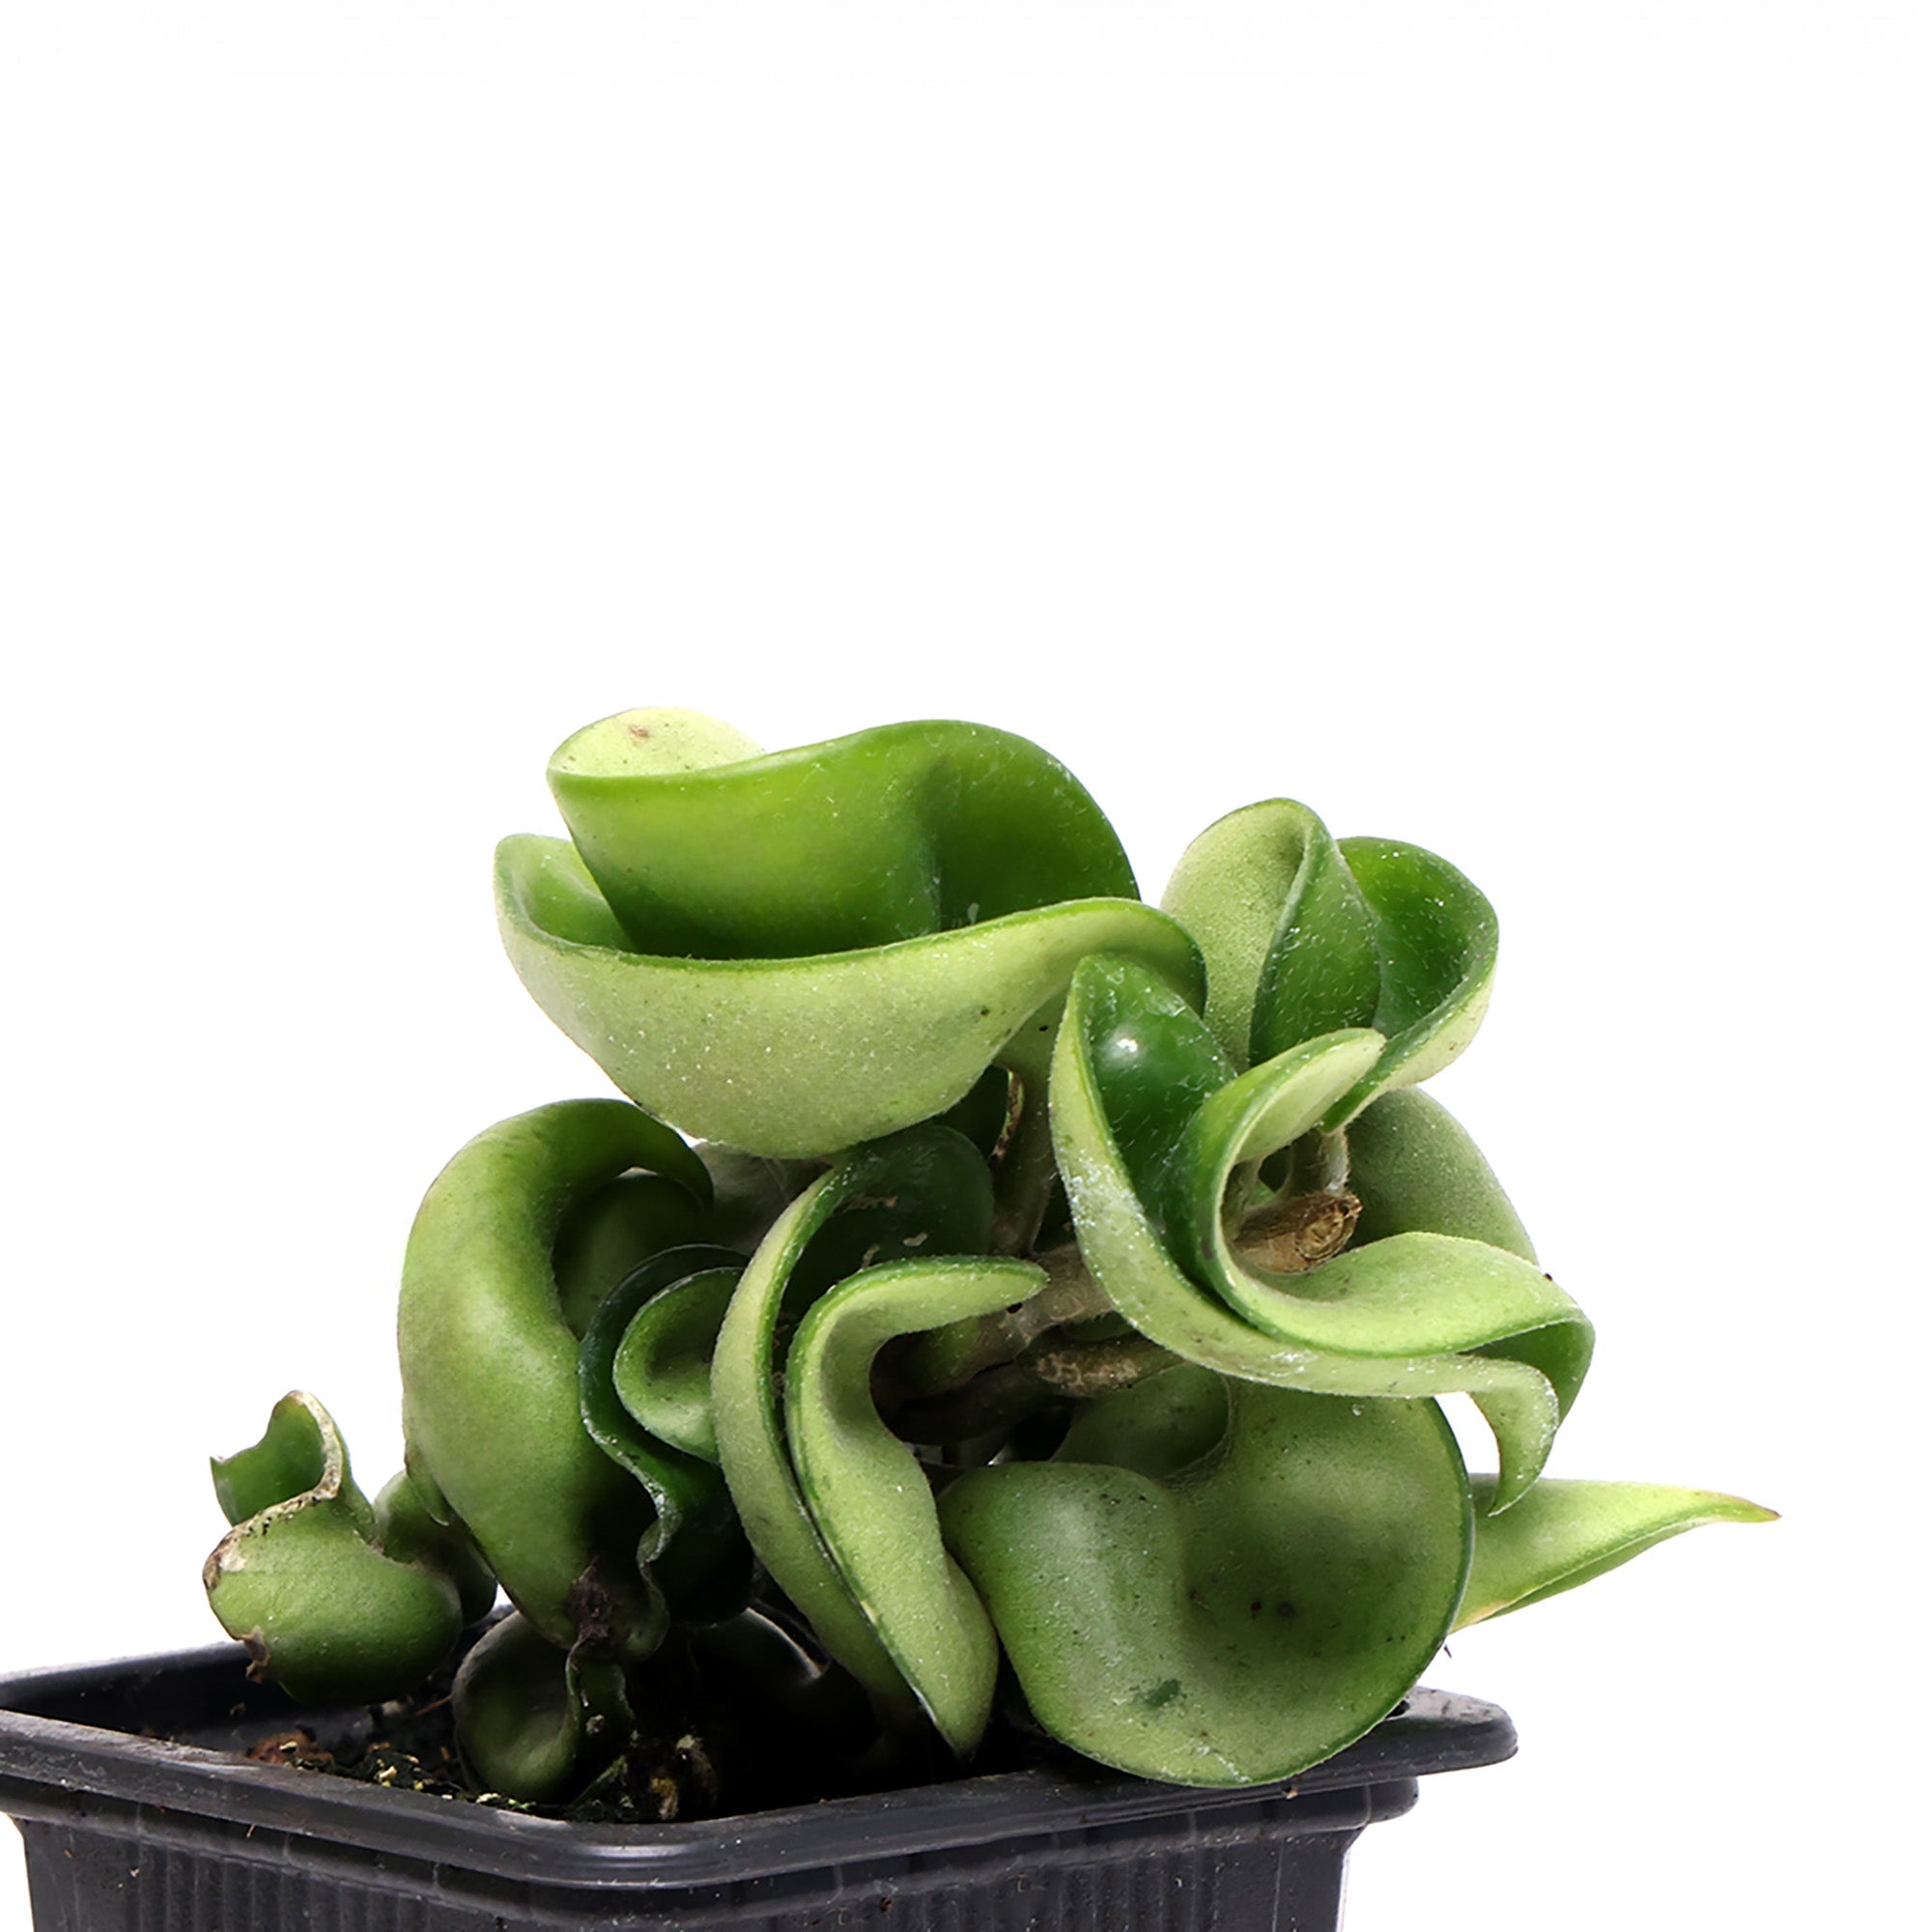 A Hoya Compacta 3 Inches plant with thick, green leaves in a small black plastic pot by Chive Studio, isolated on a white background.